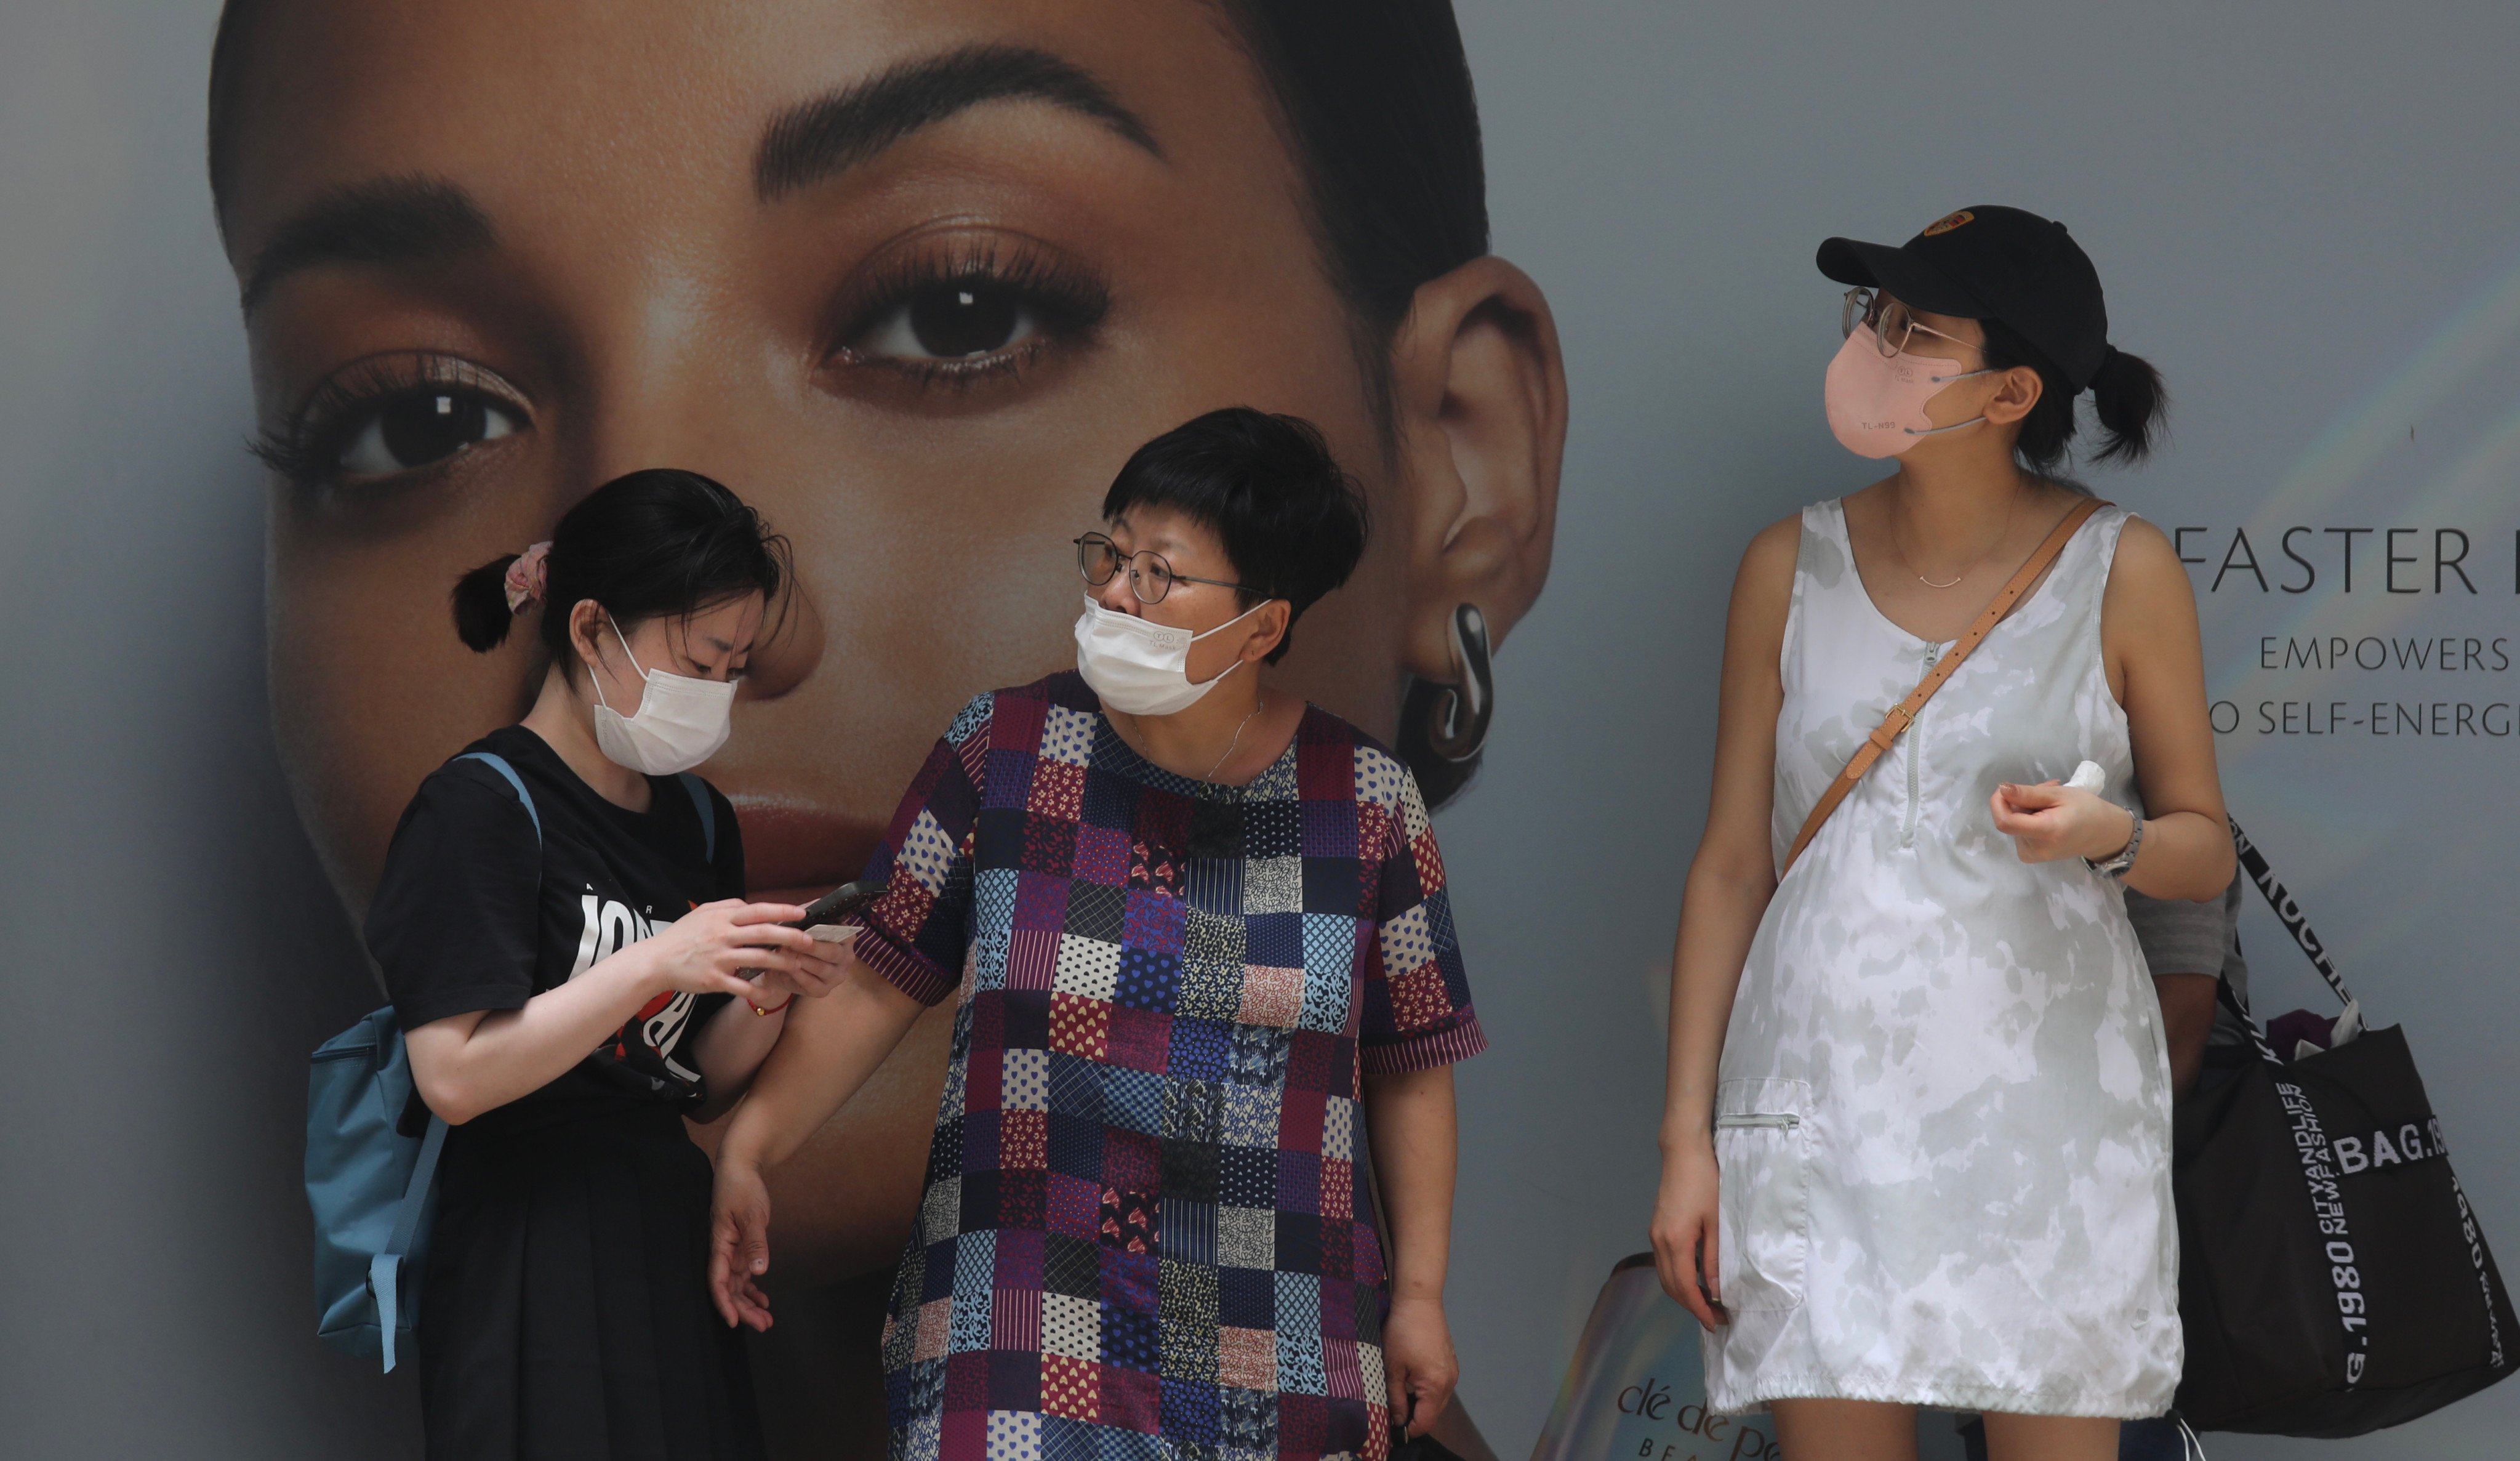 On the streets of Hong Kong, about half of people continue to wear the face coverings. Photo: Xiaomei Chen